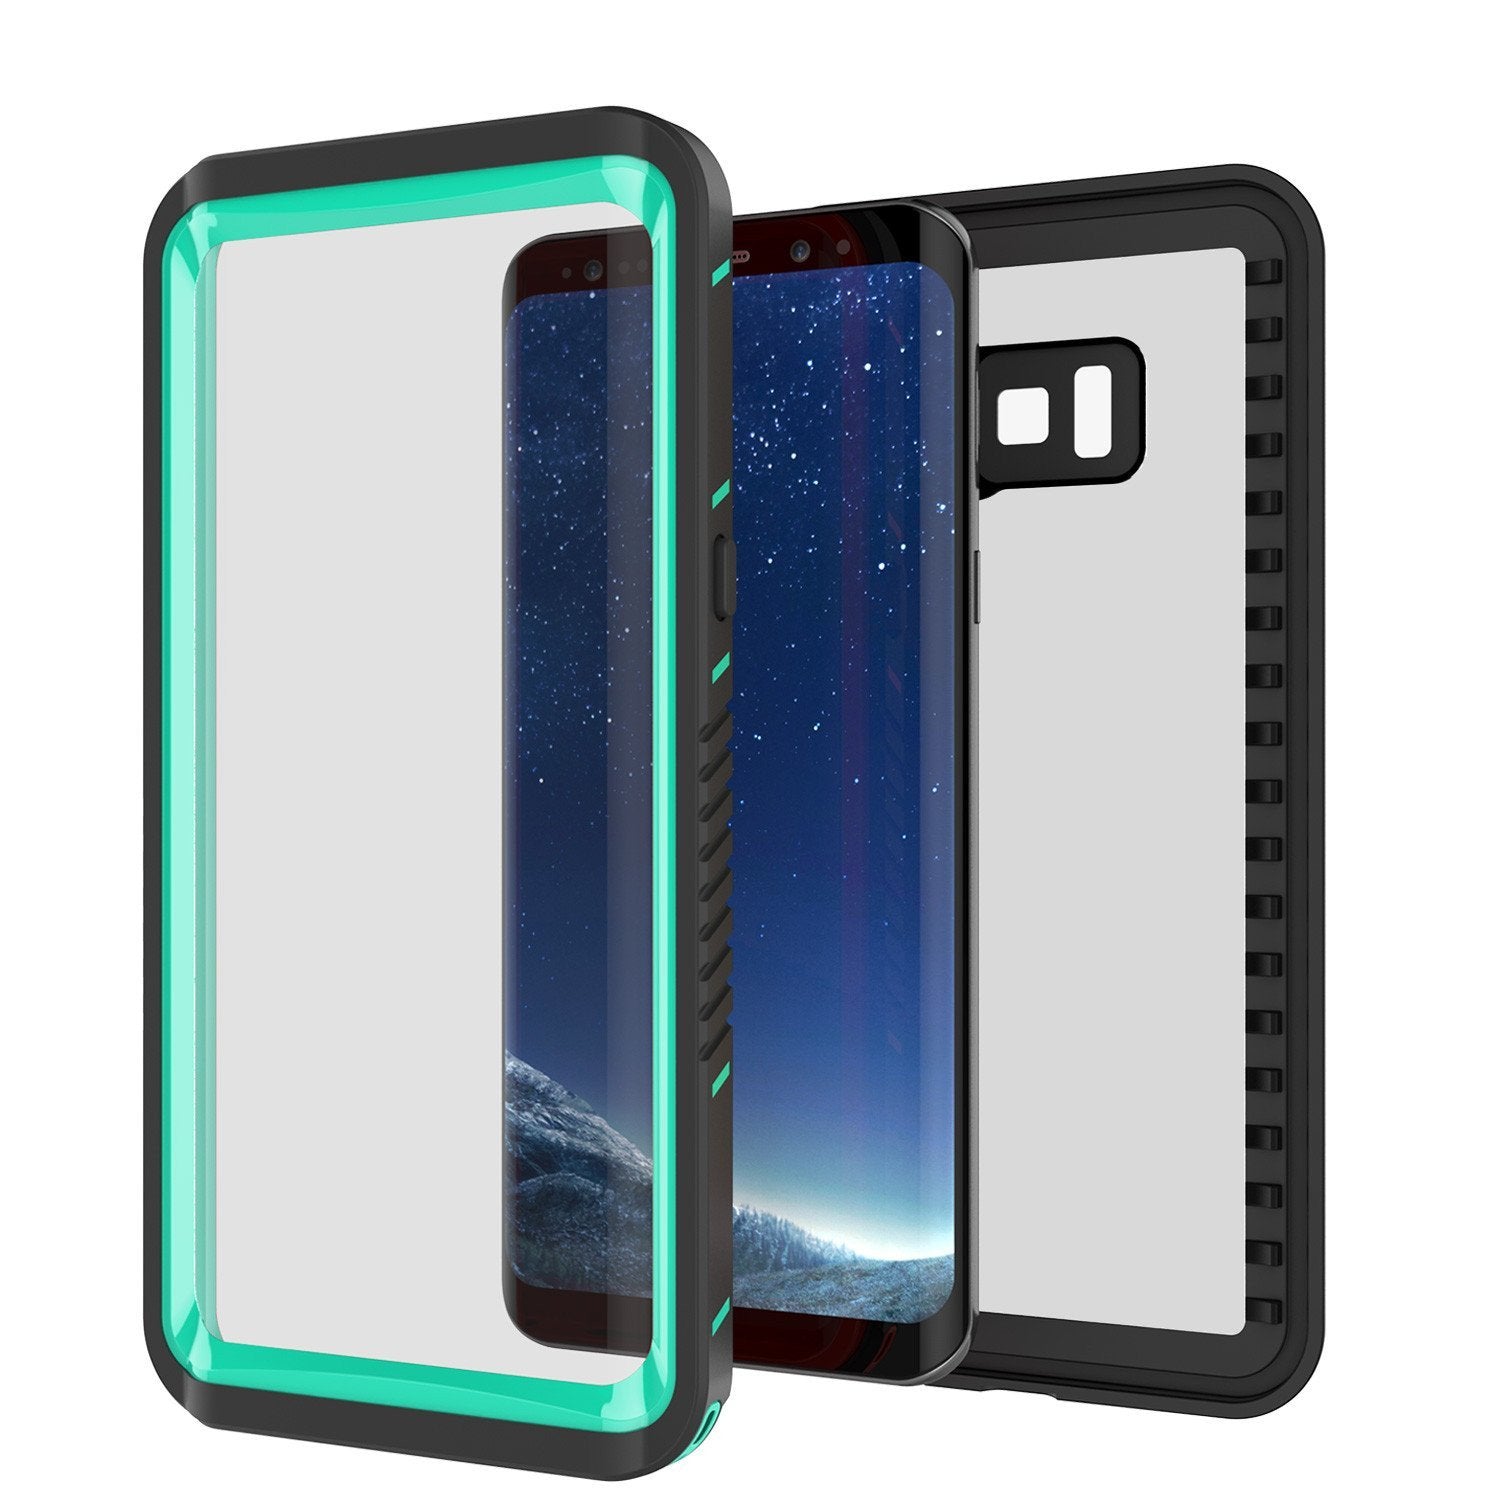 Galaxy S8 Case, Punkcase [Extreme Series] Armor Teal Cover